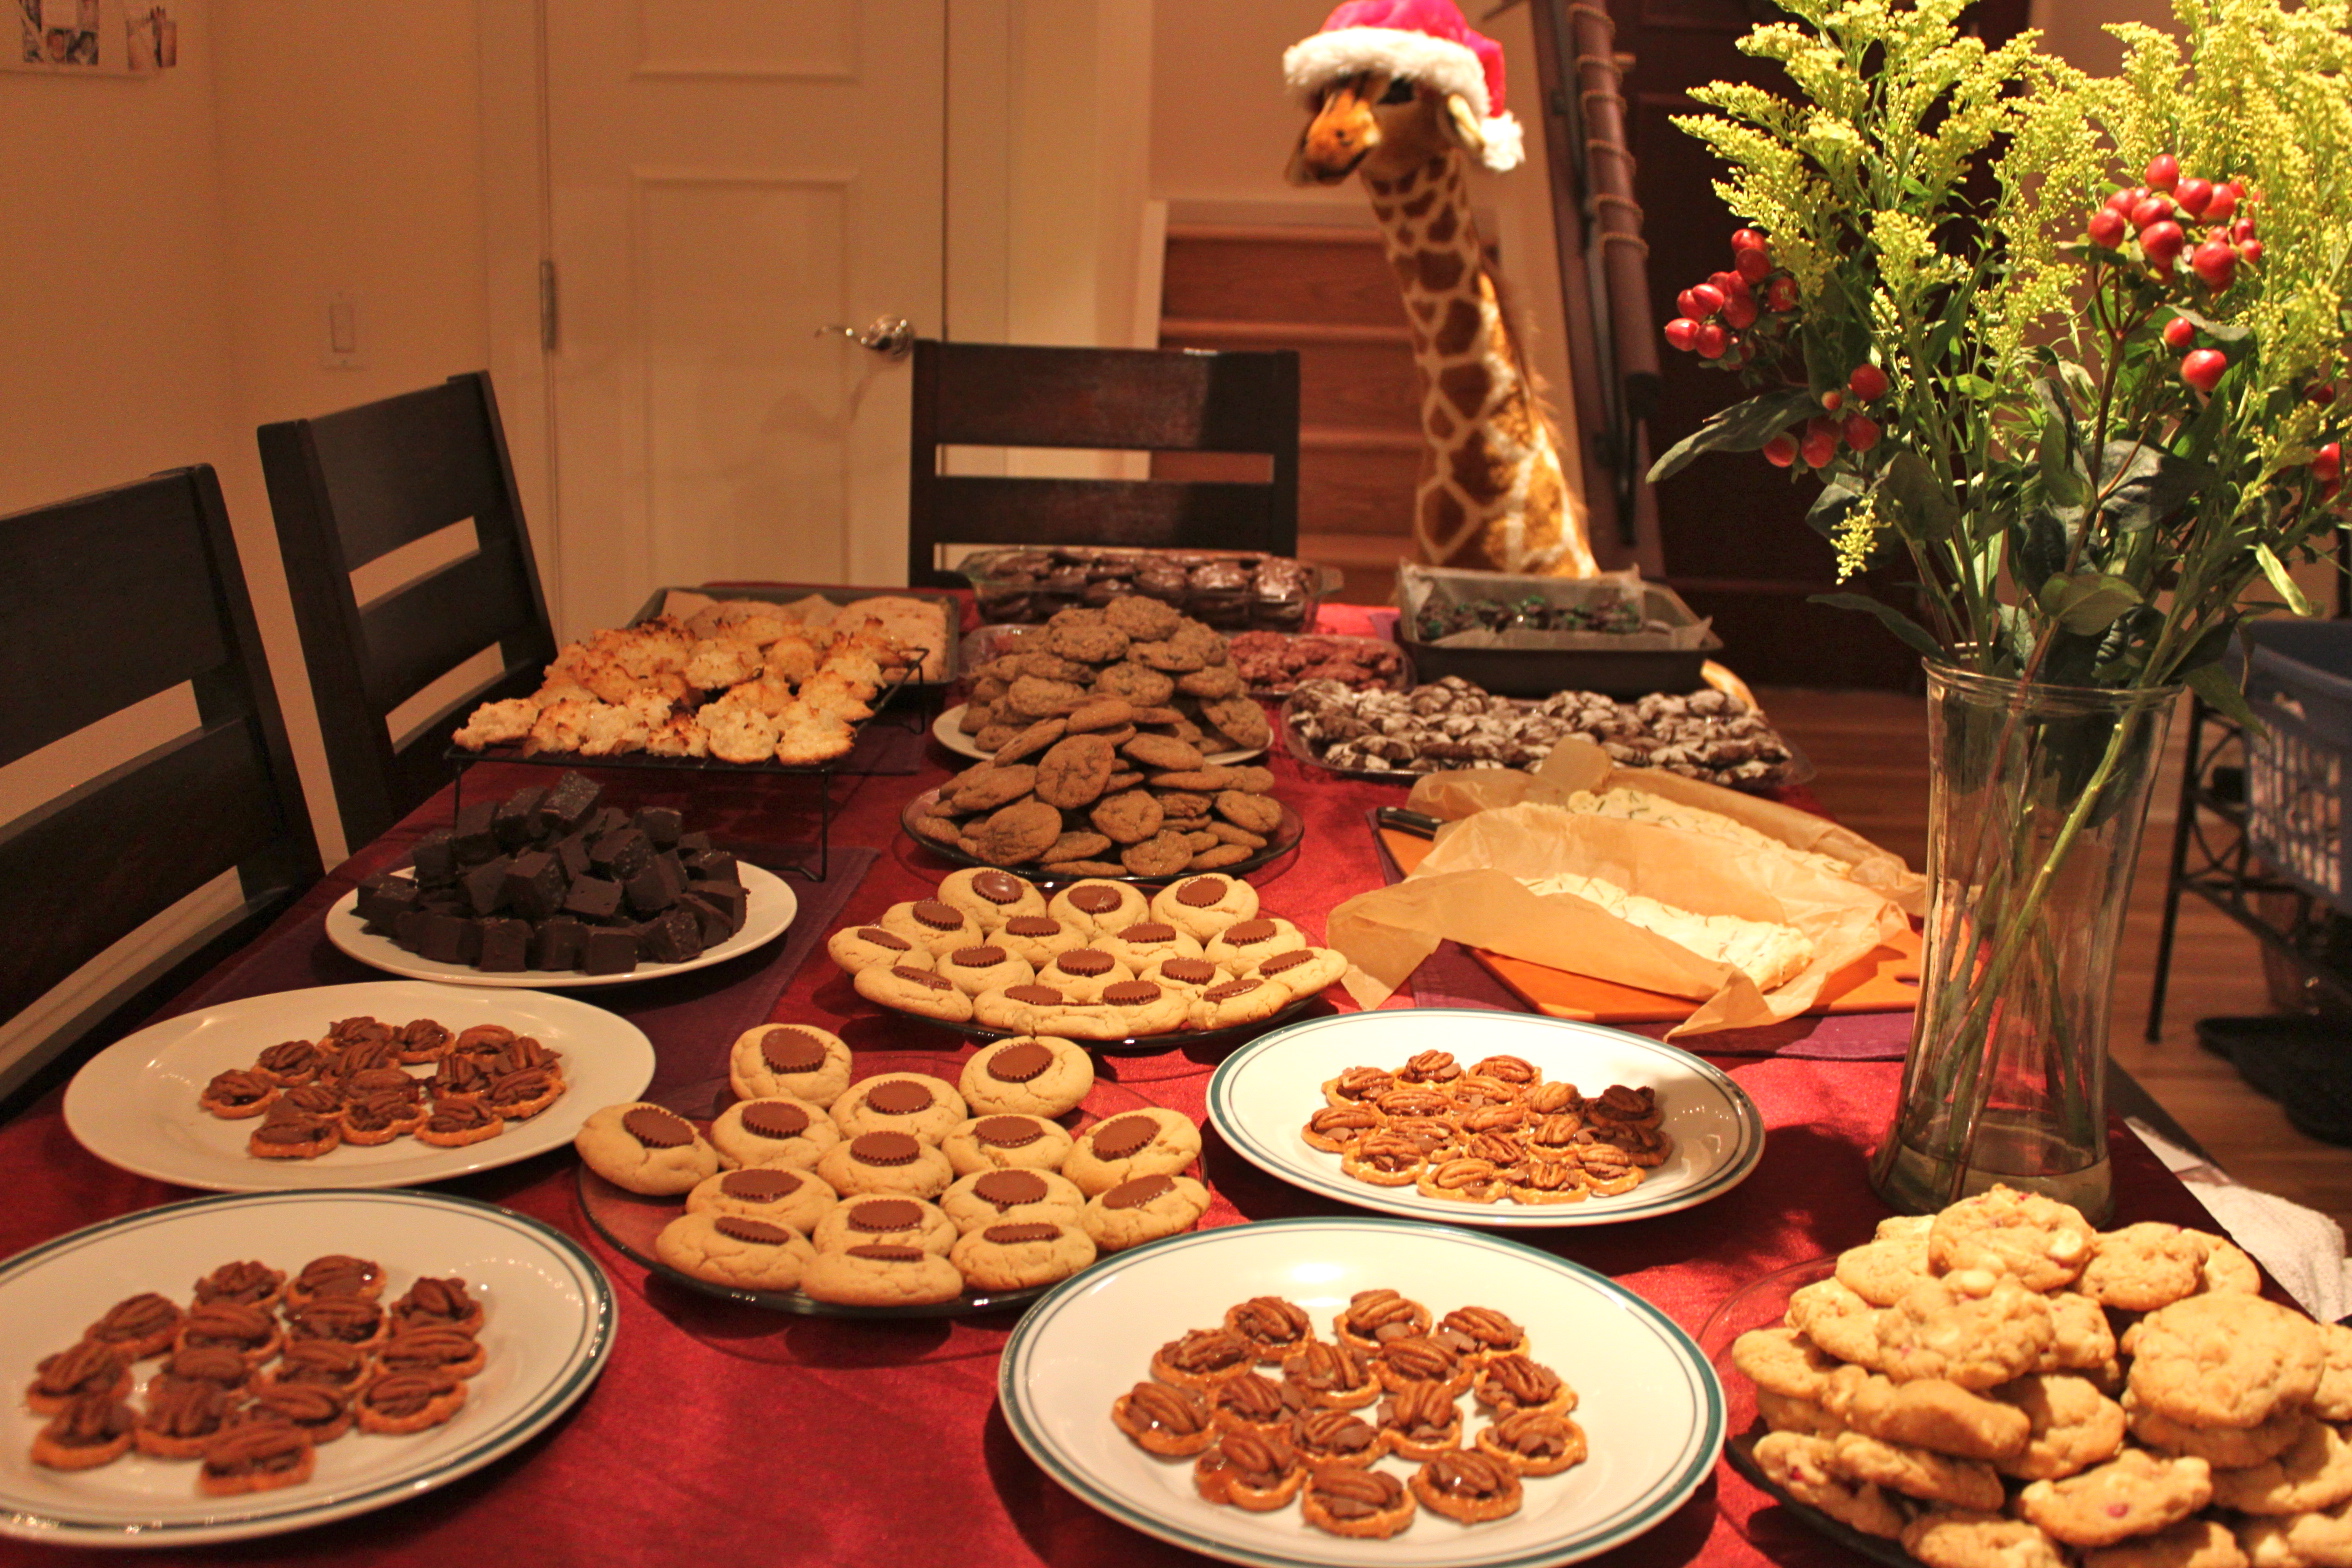 See?  There's our Christmas giraffe (seen here holding court over the results of last weekend's Christmas Cookie Bake-a-Palooza).